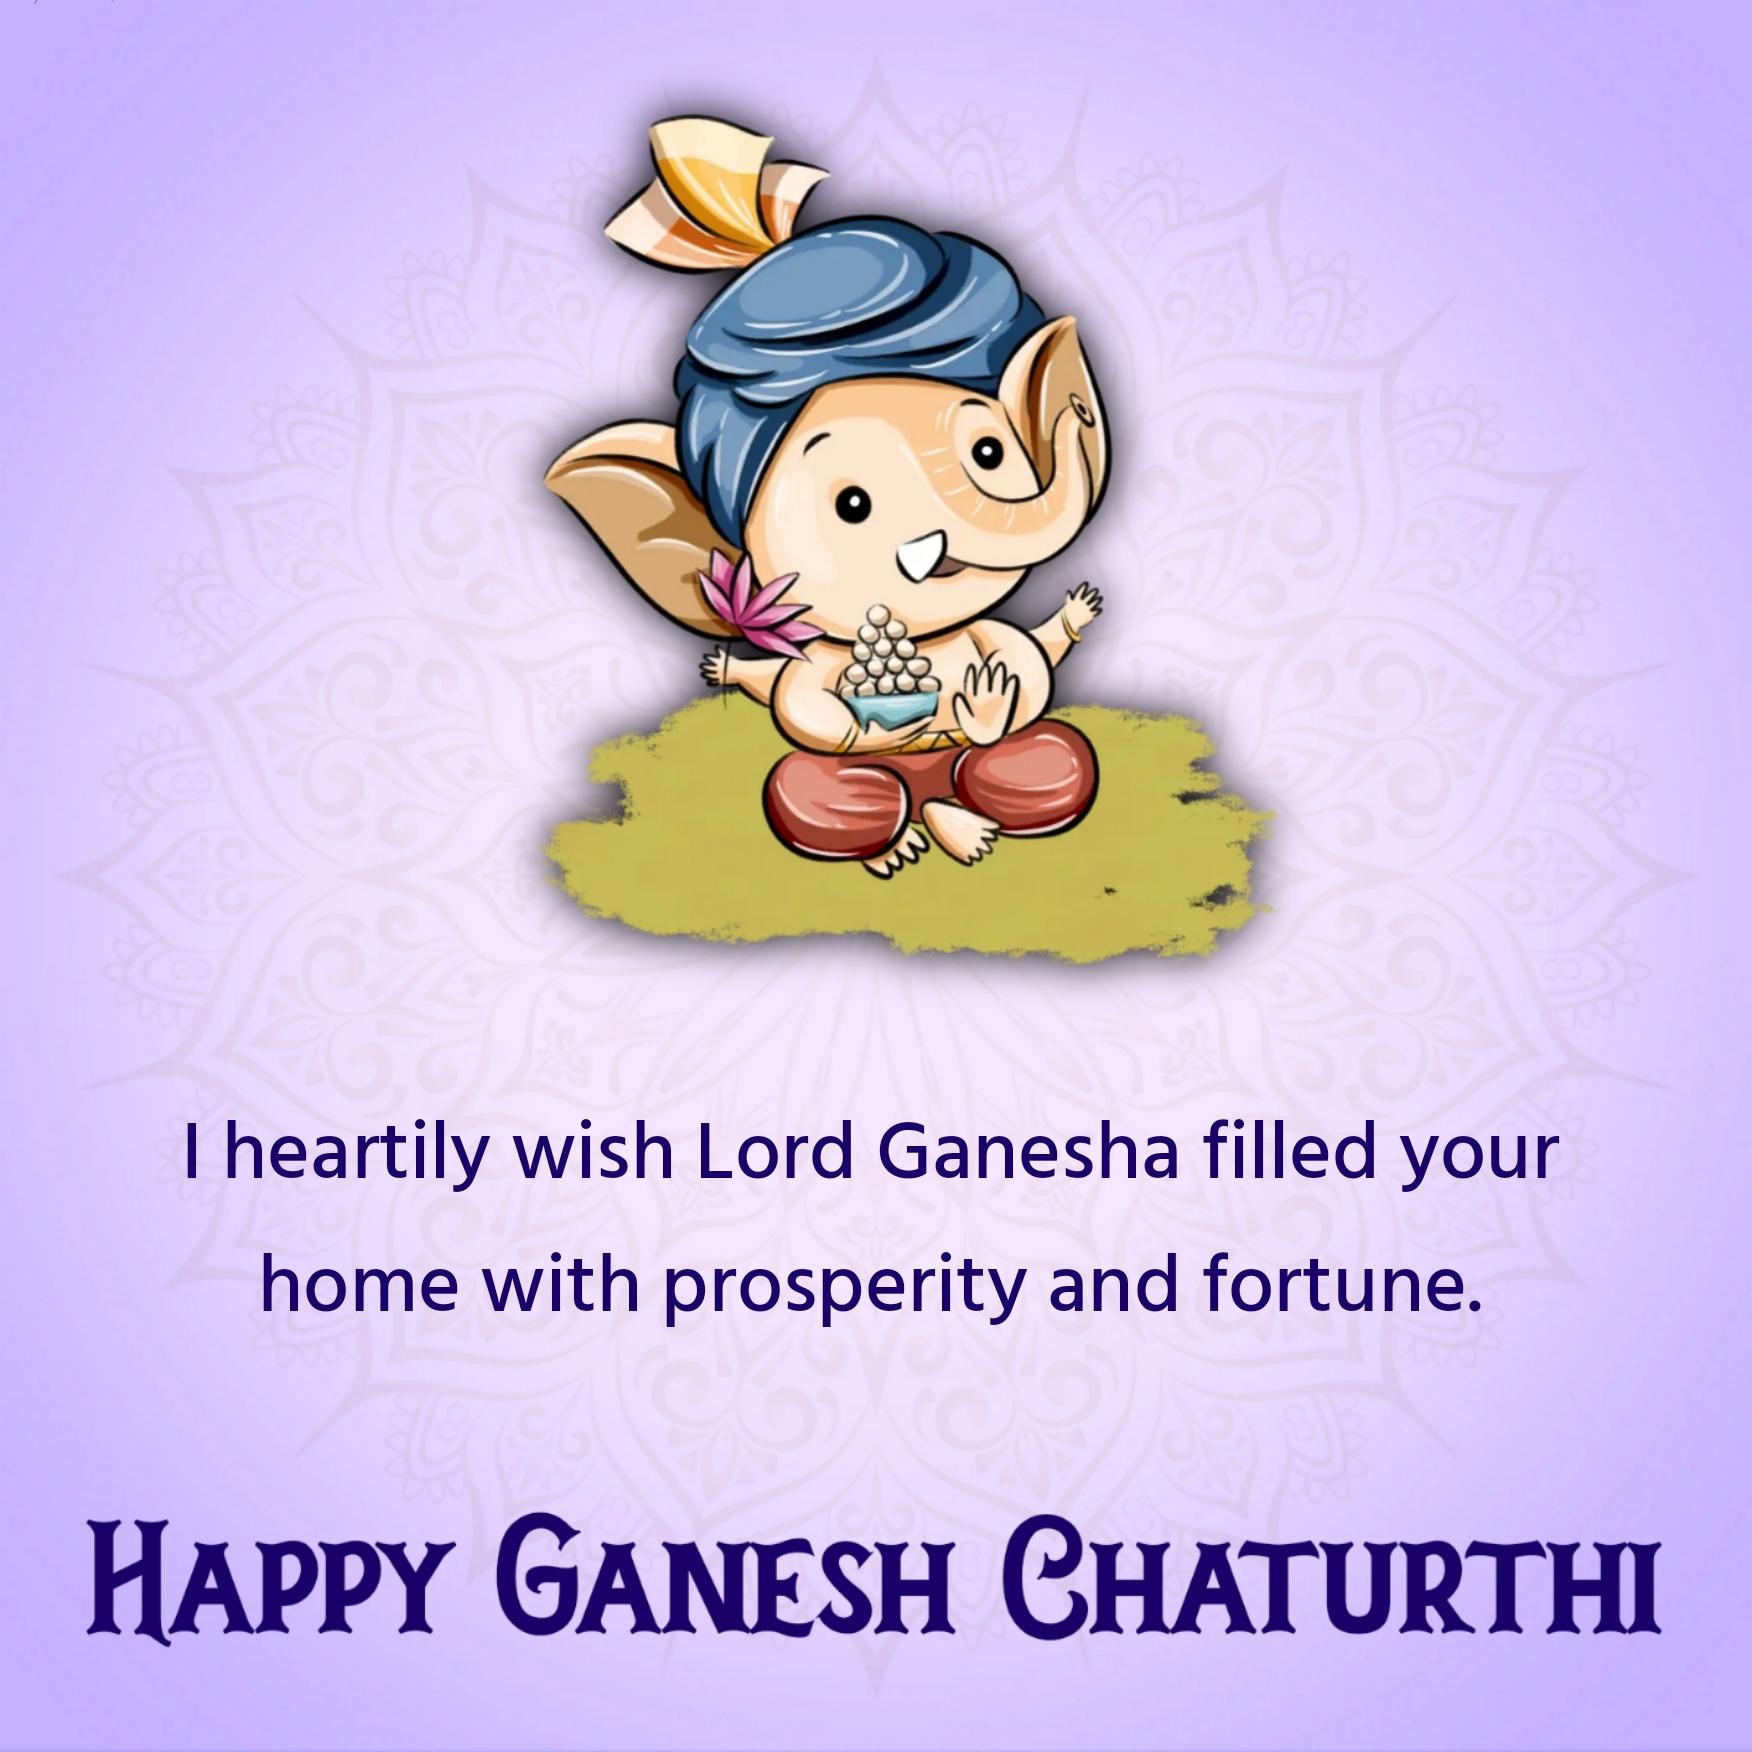 I heartily wish Lord Ganesha filled your home